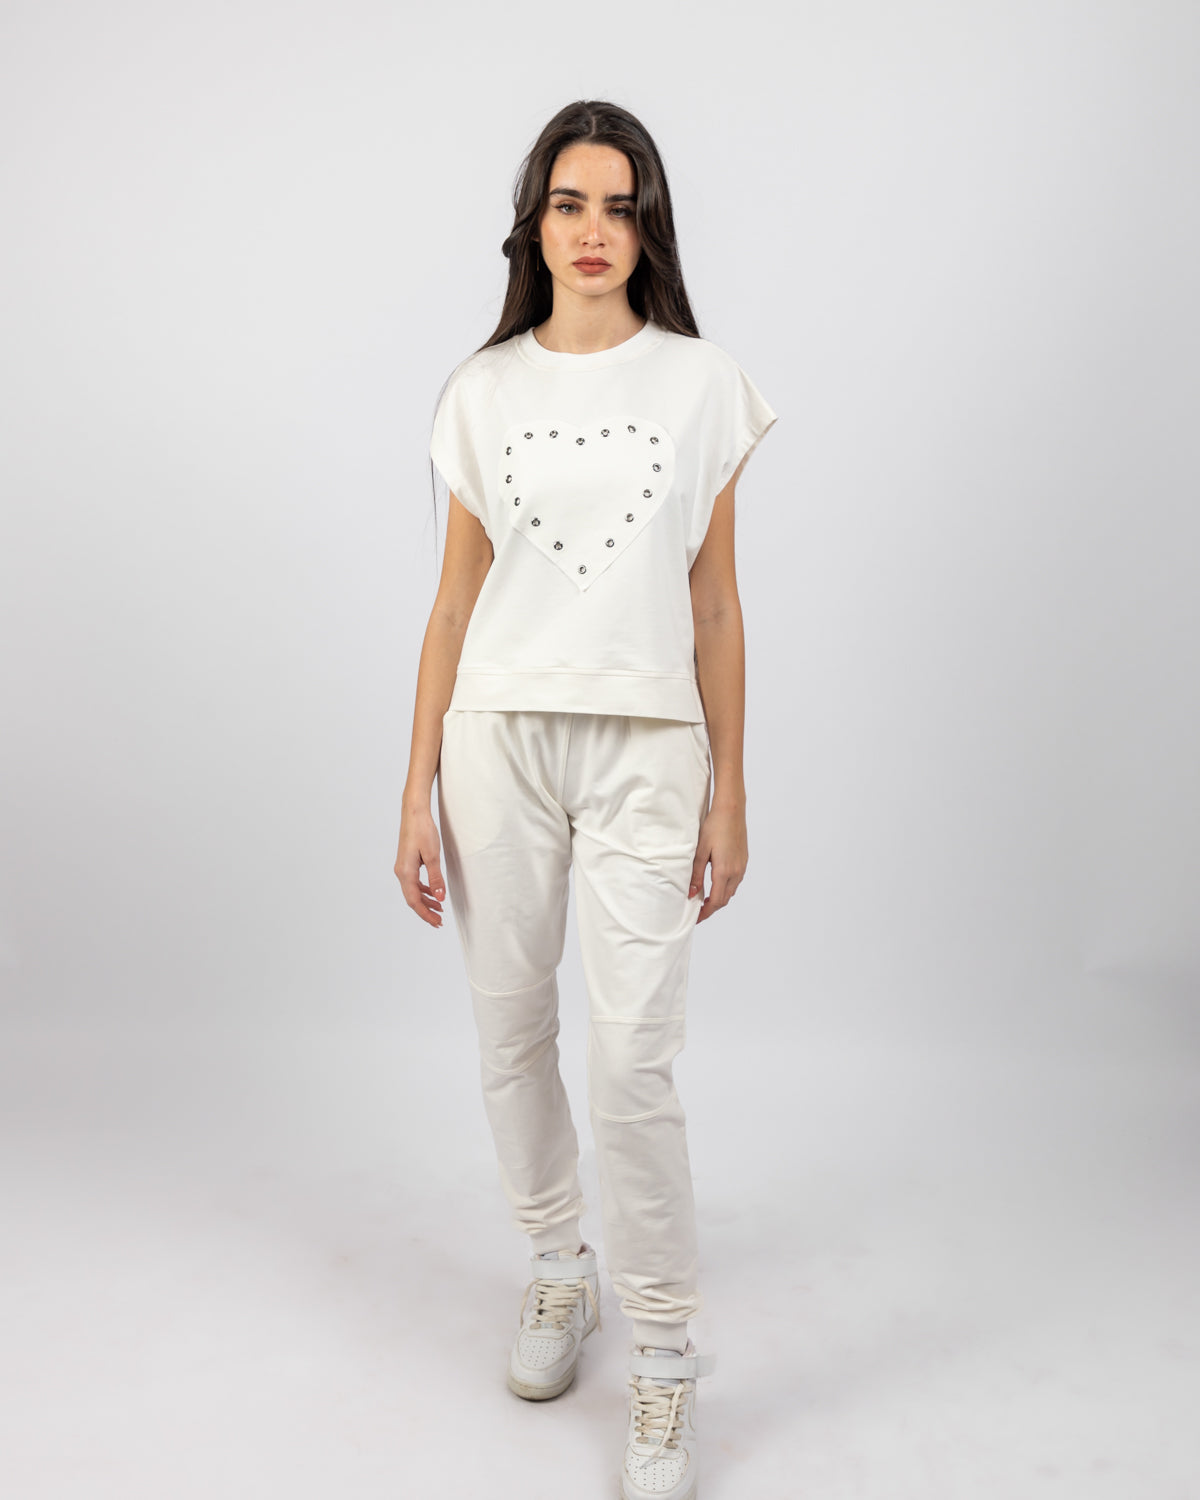 Sweat Pant For Women - Off White